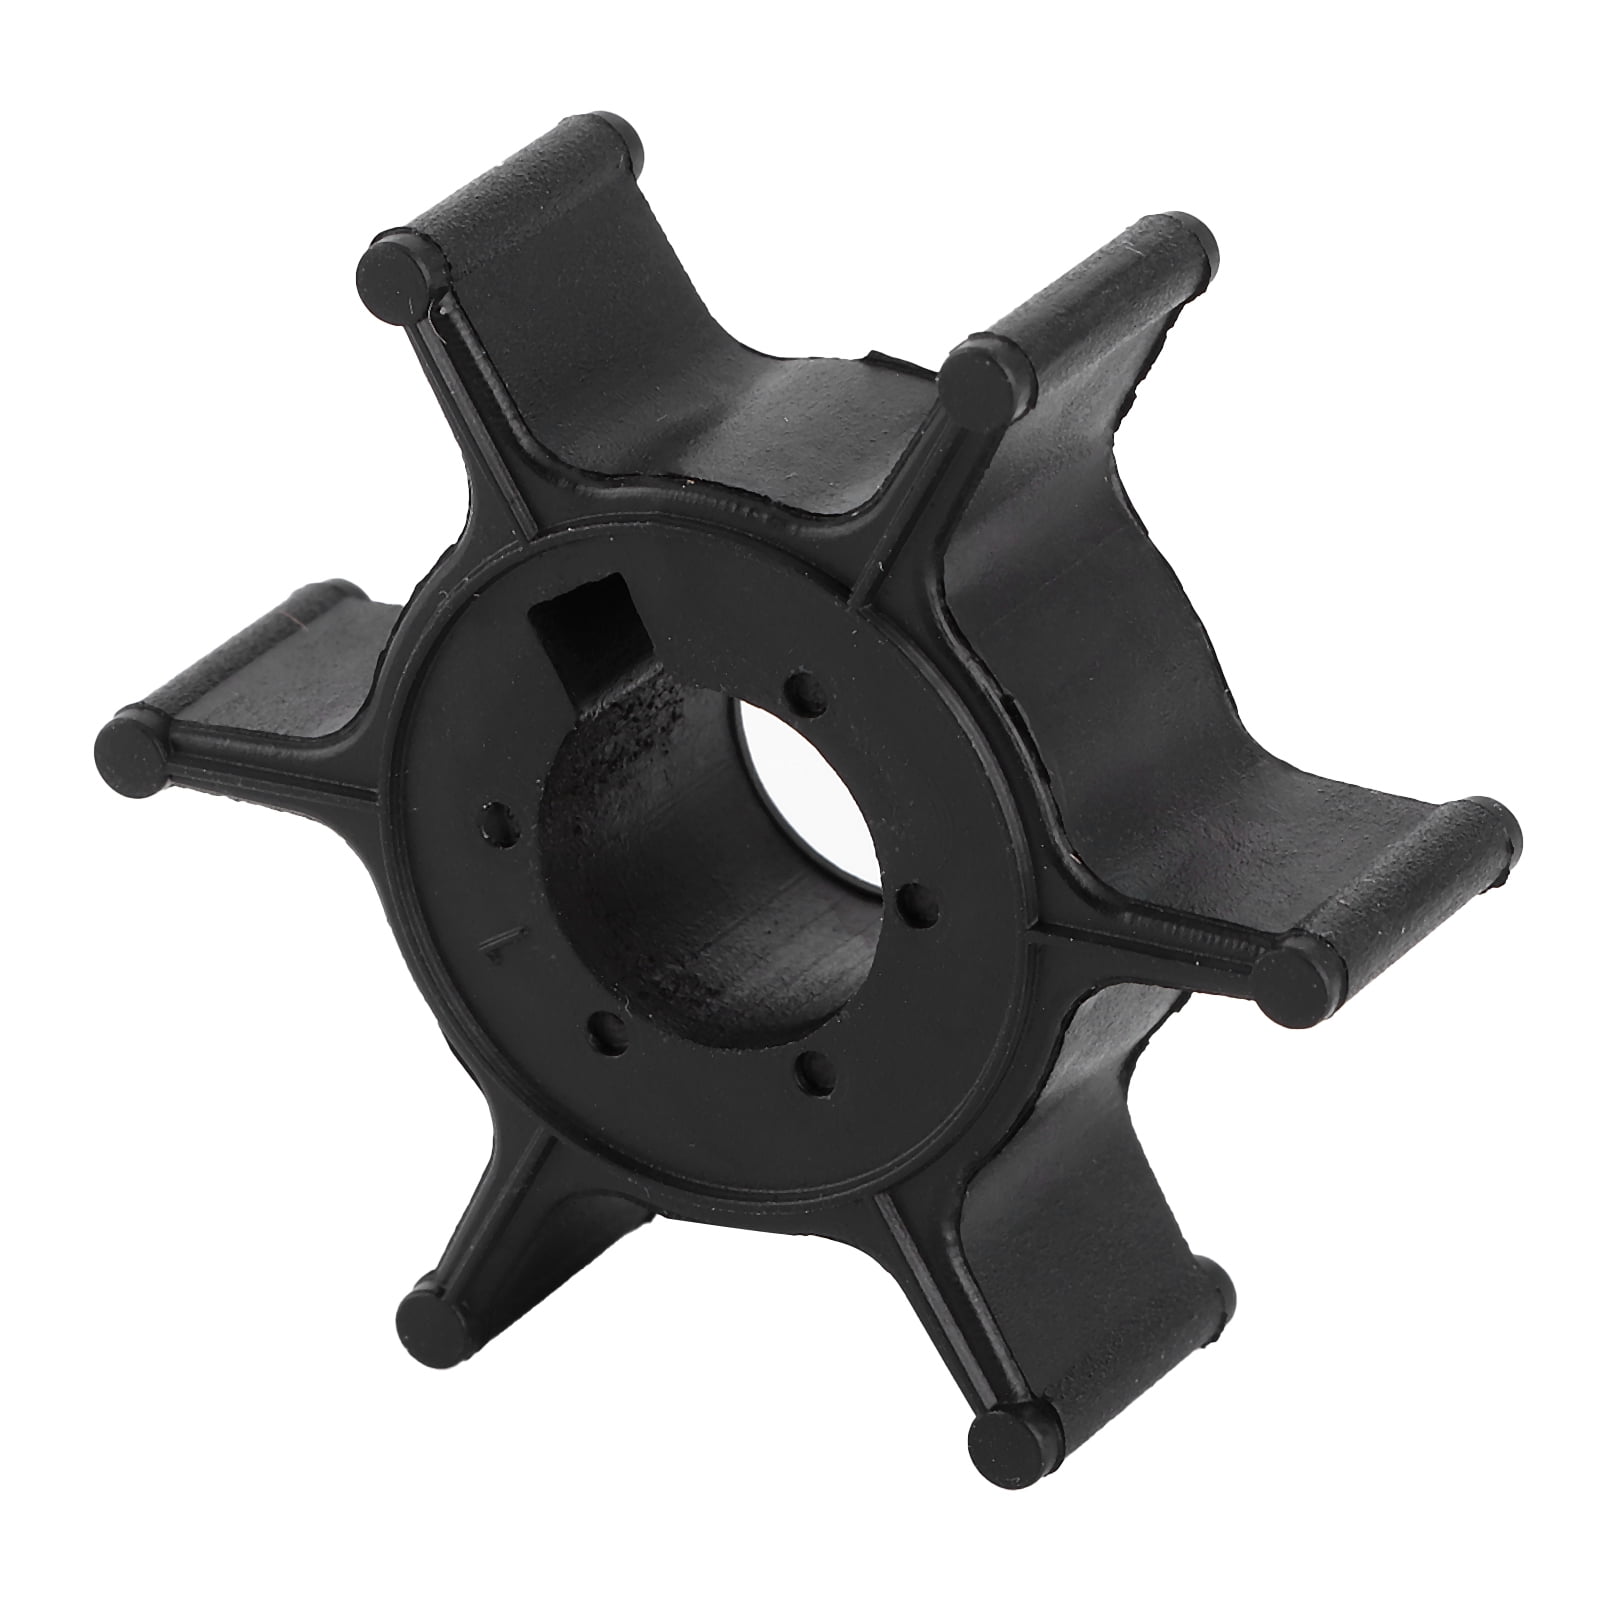 Black Almencla Water Pump Impeller Replacement for Yamaha 4hp & 5 Hp 2 Stroke Outboard Motor Parts 